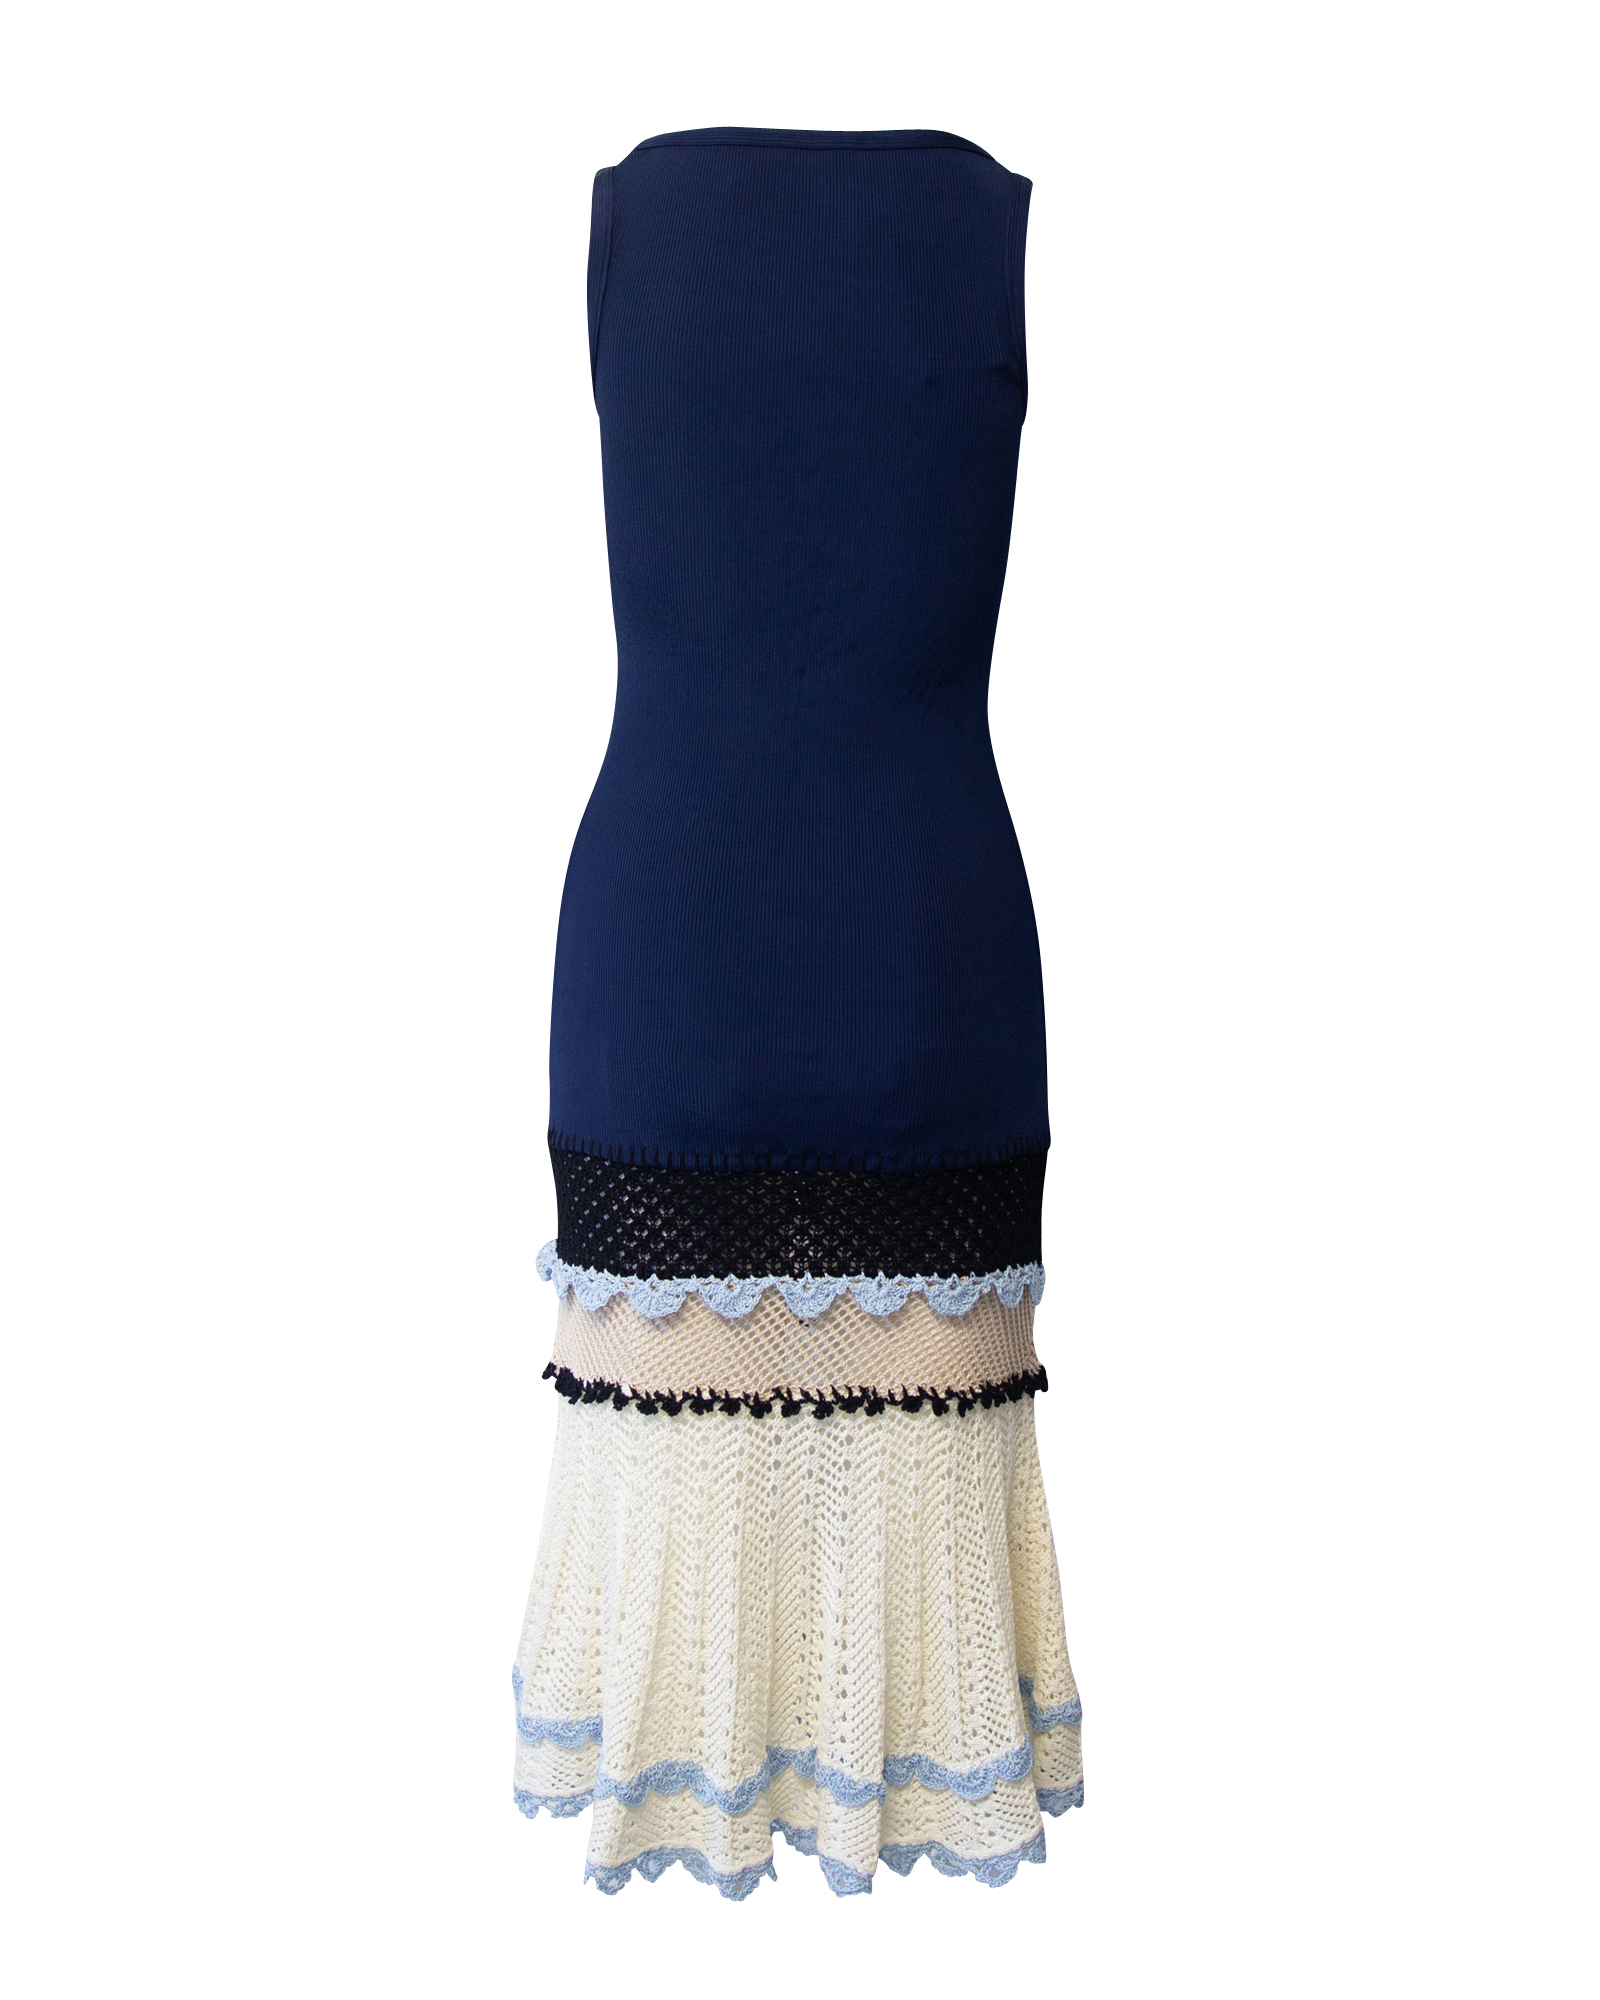 Knitted Dress with Crochet Flared Hem in Navy Blue Cotton